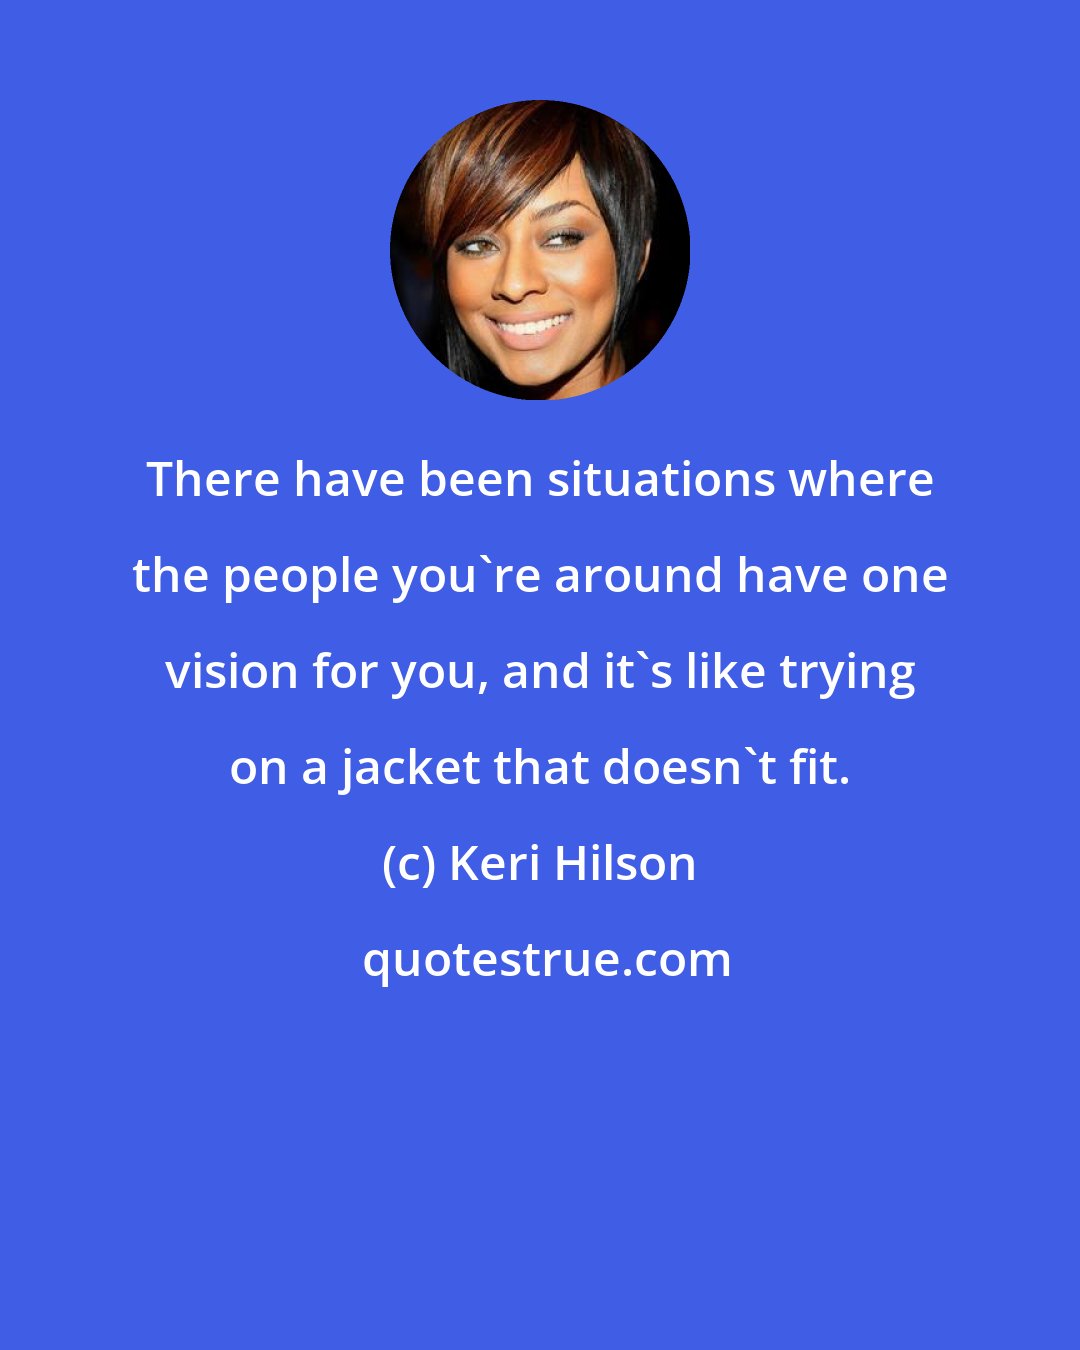 Keri Hilson: There have been situations where the people you're around have one vision for you, and it's like trying on a jacket that doesn't fit.